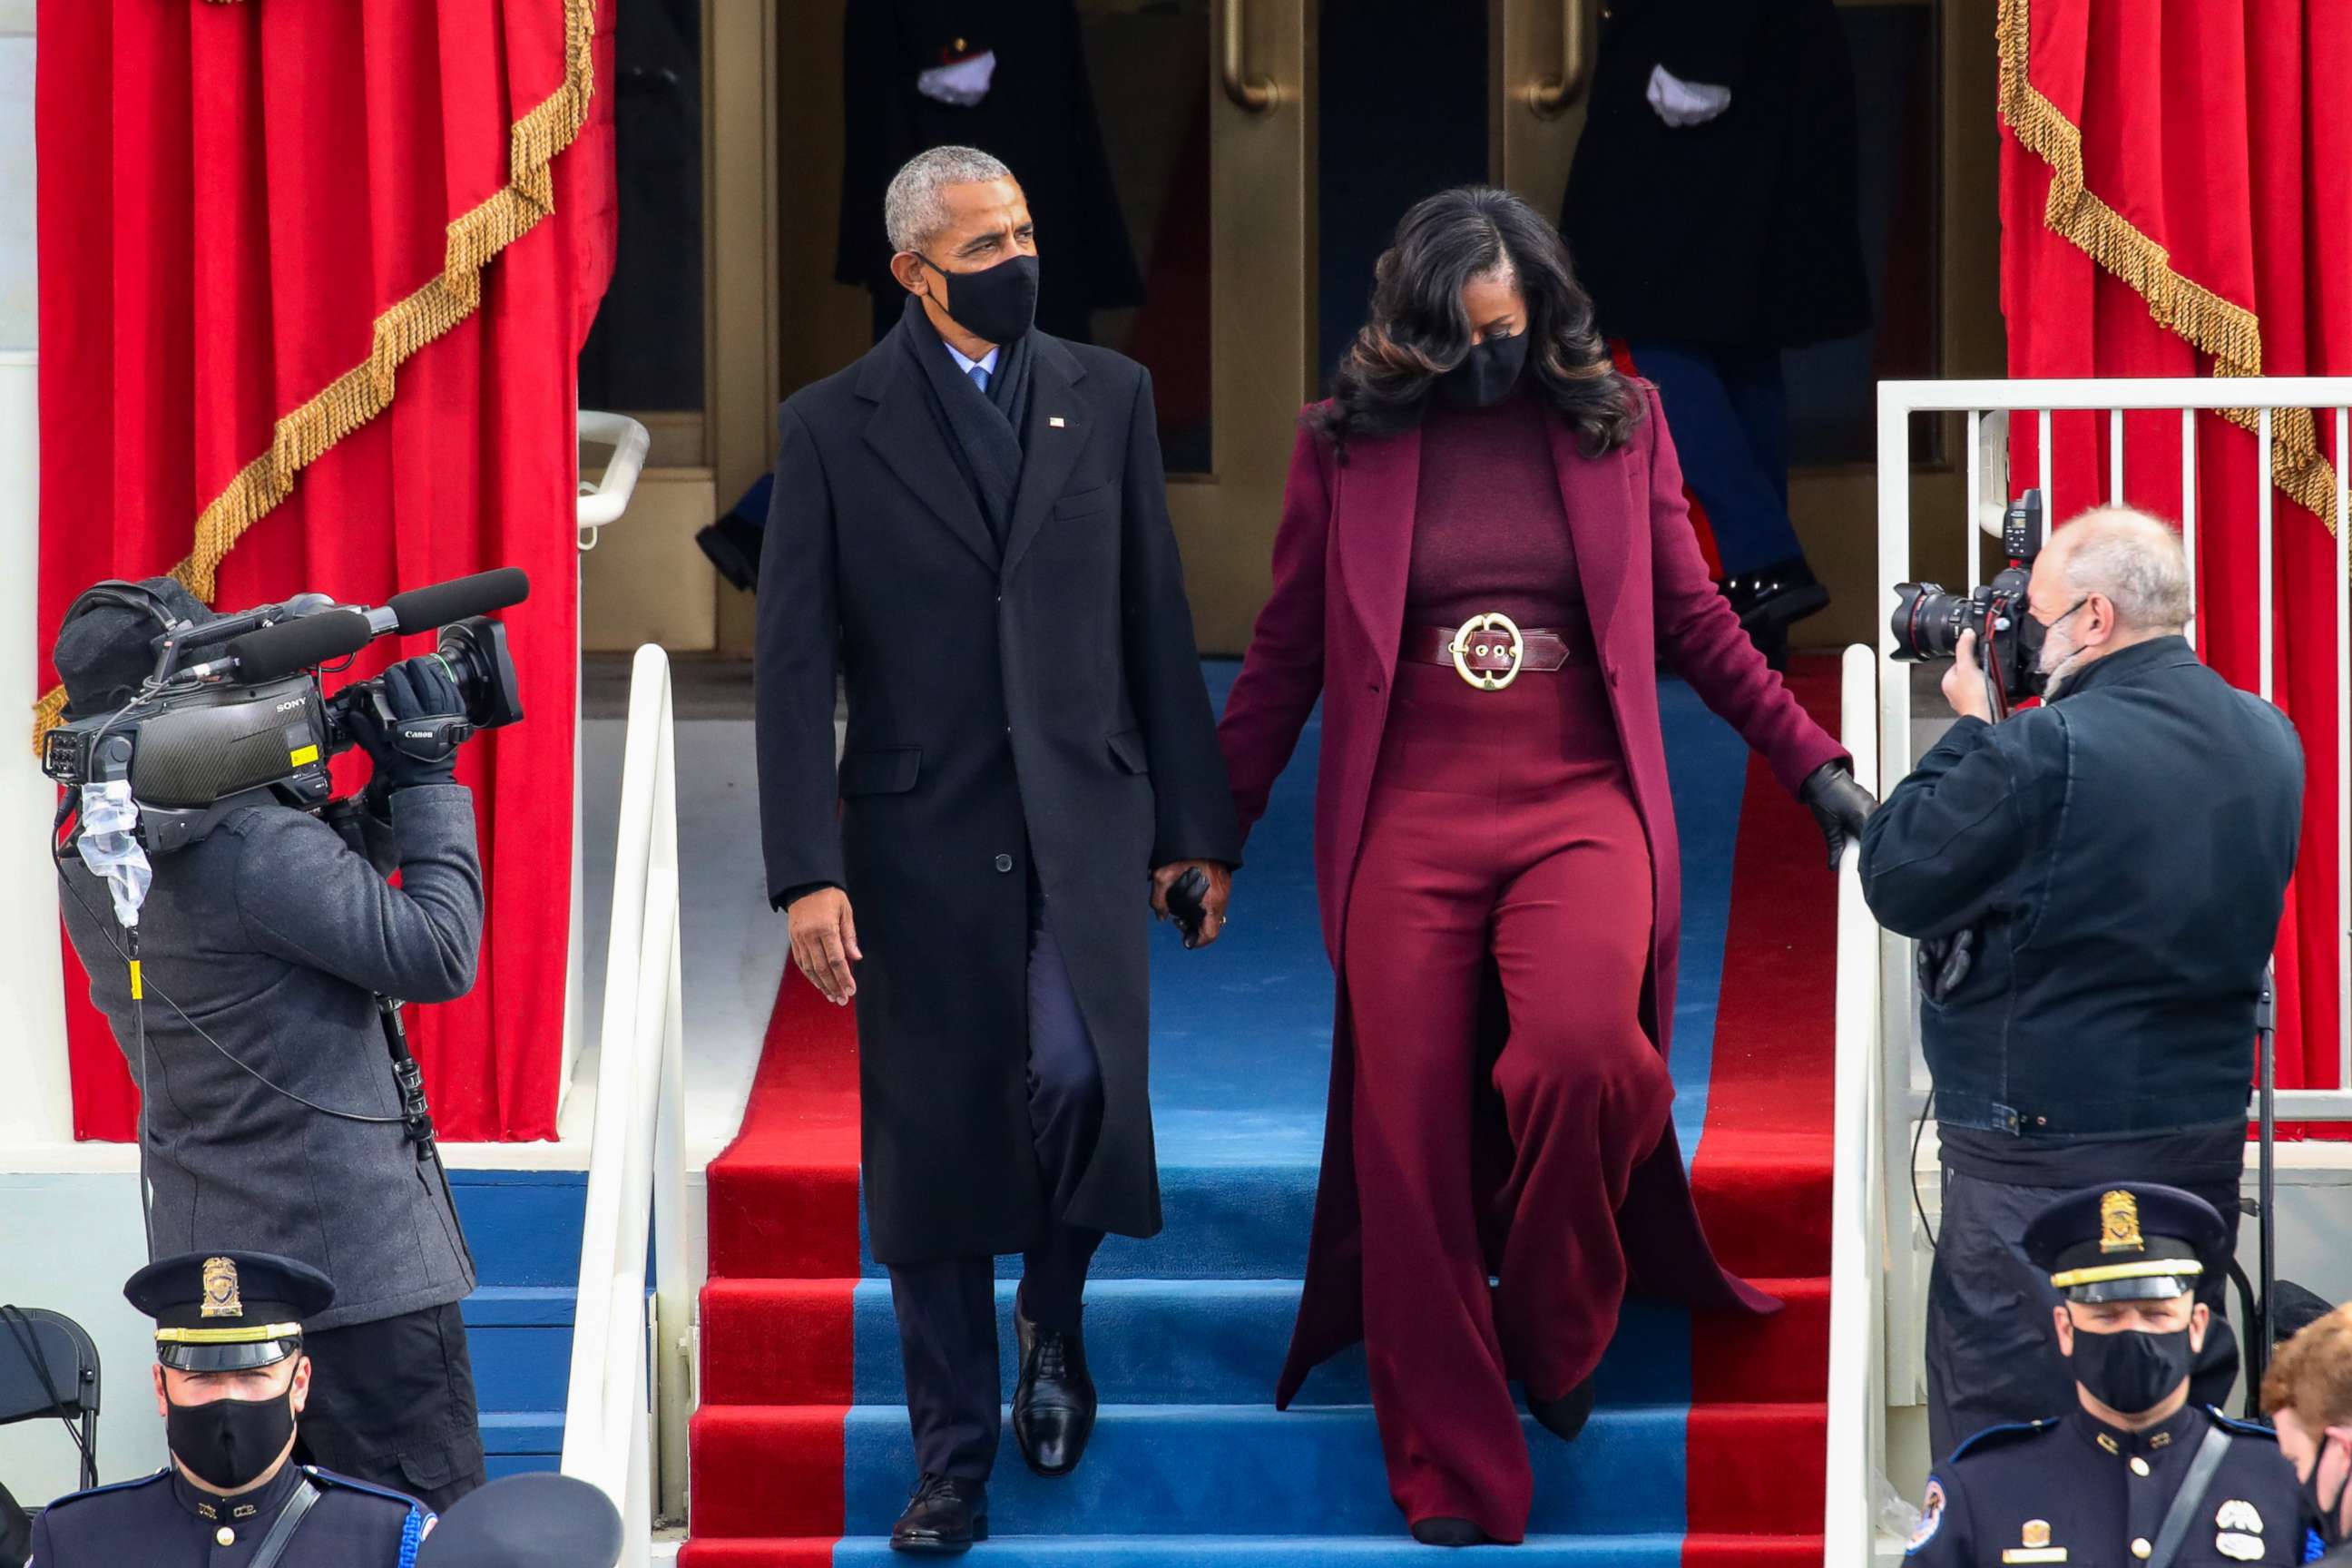 PHOTO: Former President Barack Obama and former first lady Michelle Obama arrive to the inauguration of President-elect Joe Biden on the West Front of the U.S. Capitol on Jan. 20, 2021, in Washington, D.C.